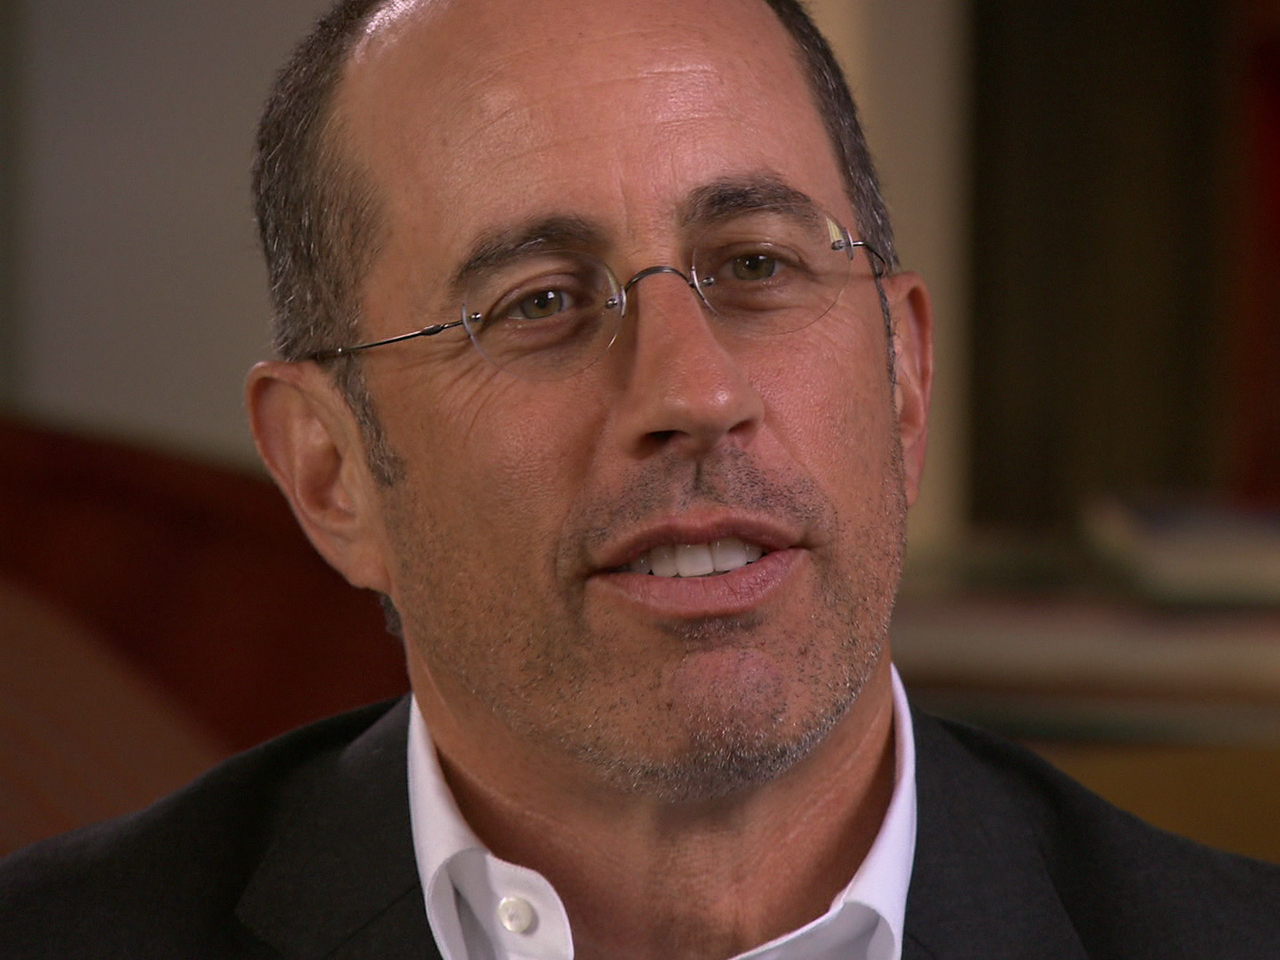 Jerry Seinfeld: "A laugh is such a pure thing" - CBS News